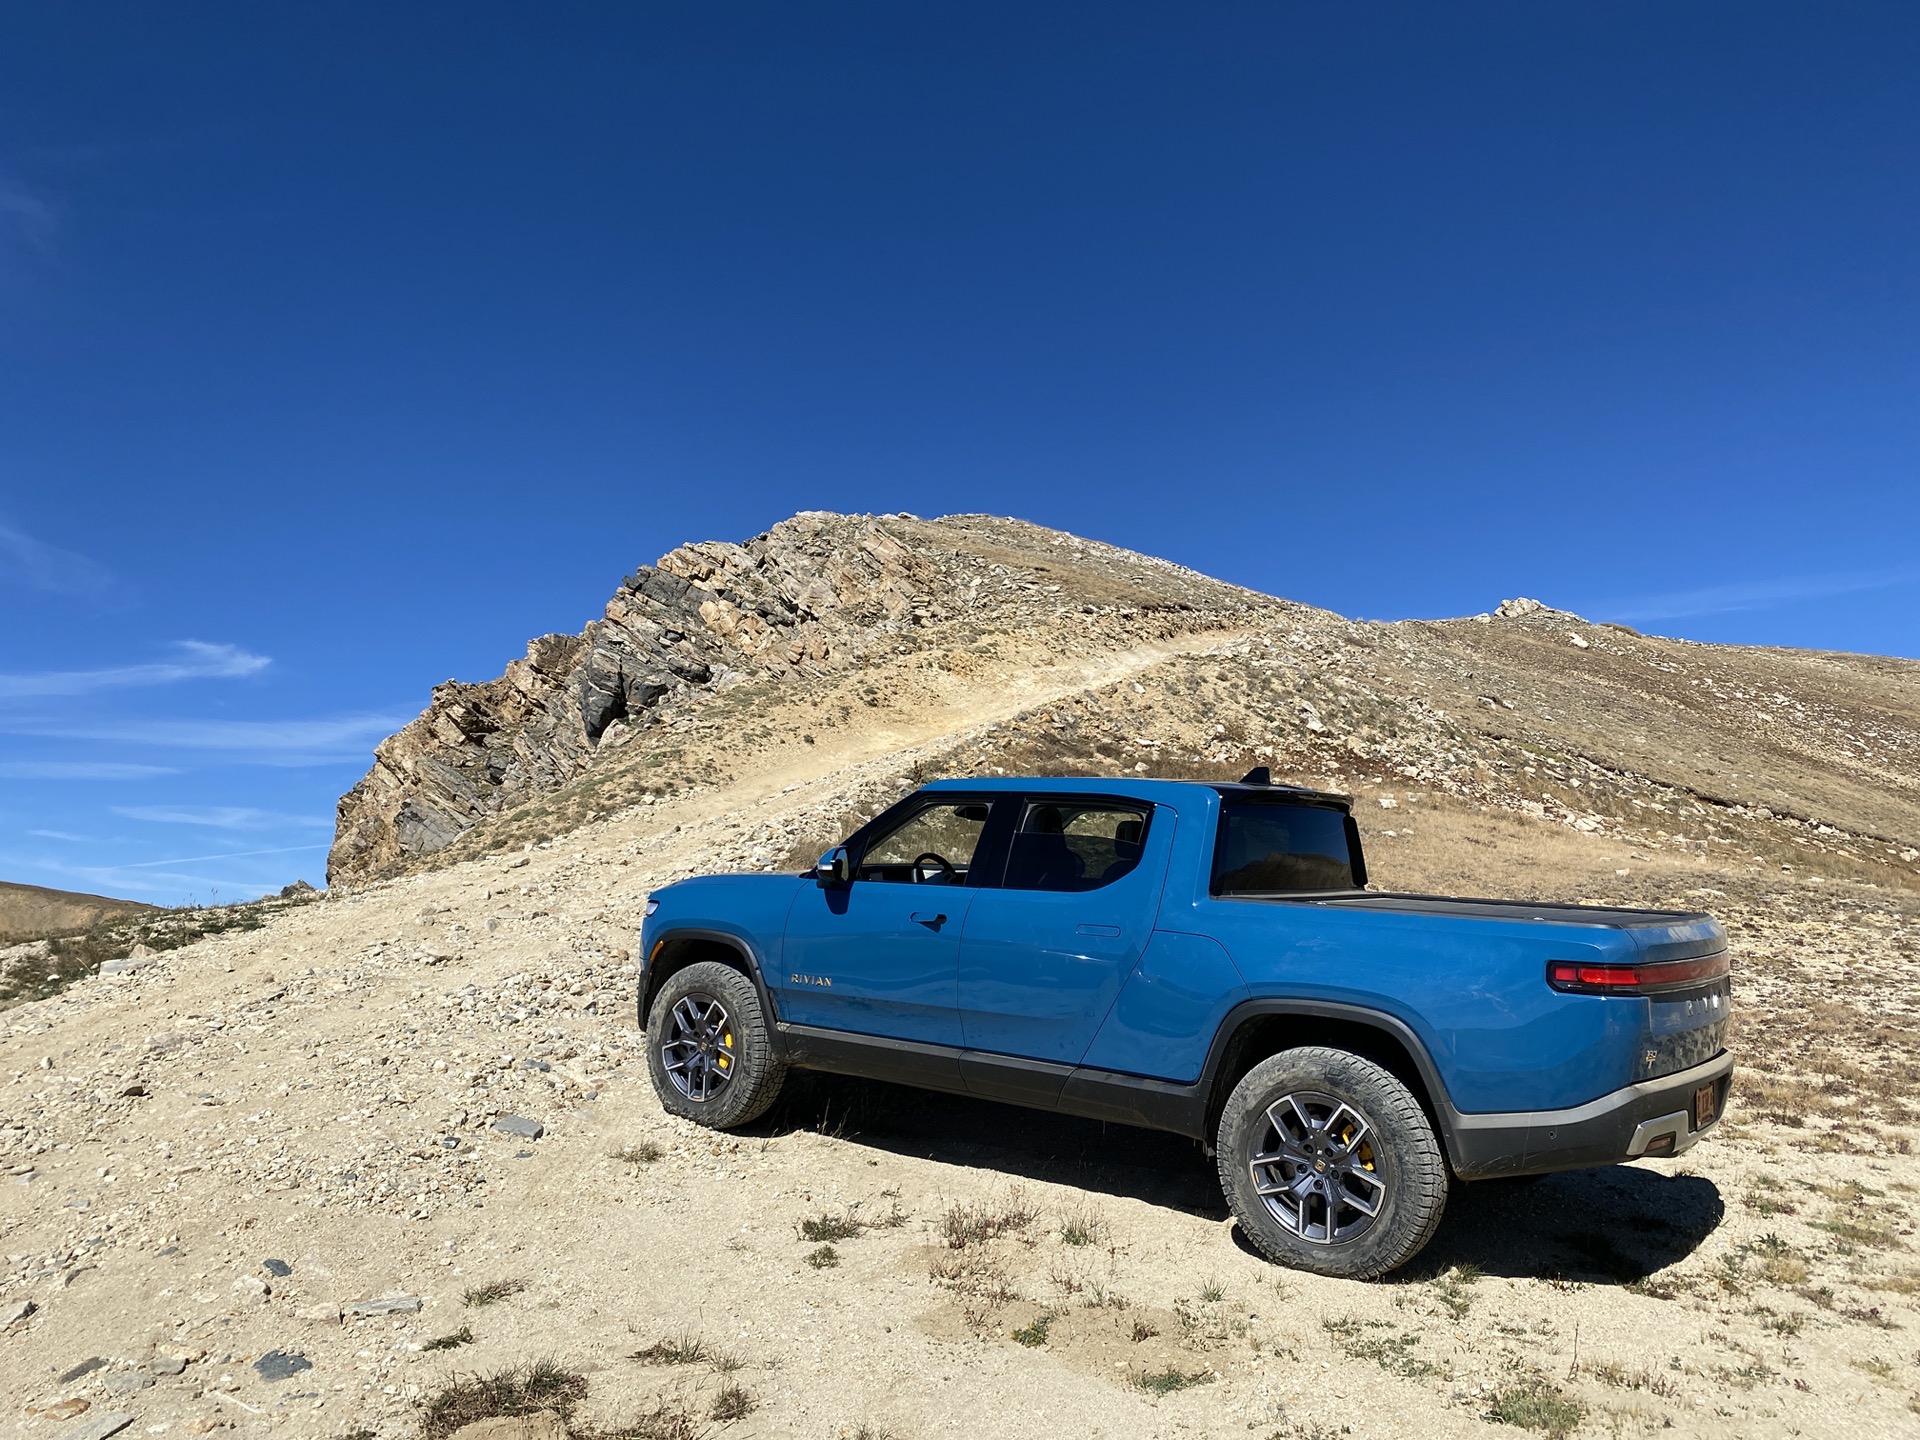 First drive review: 2022 Rivian R1T shines as the North Star of utility vehiclesFirst drive review: 2022 Rivian R1T shines as the North Star of utility vehicles